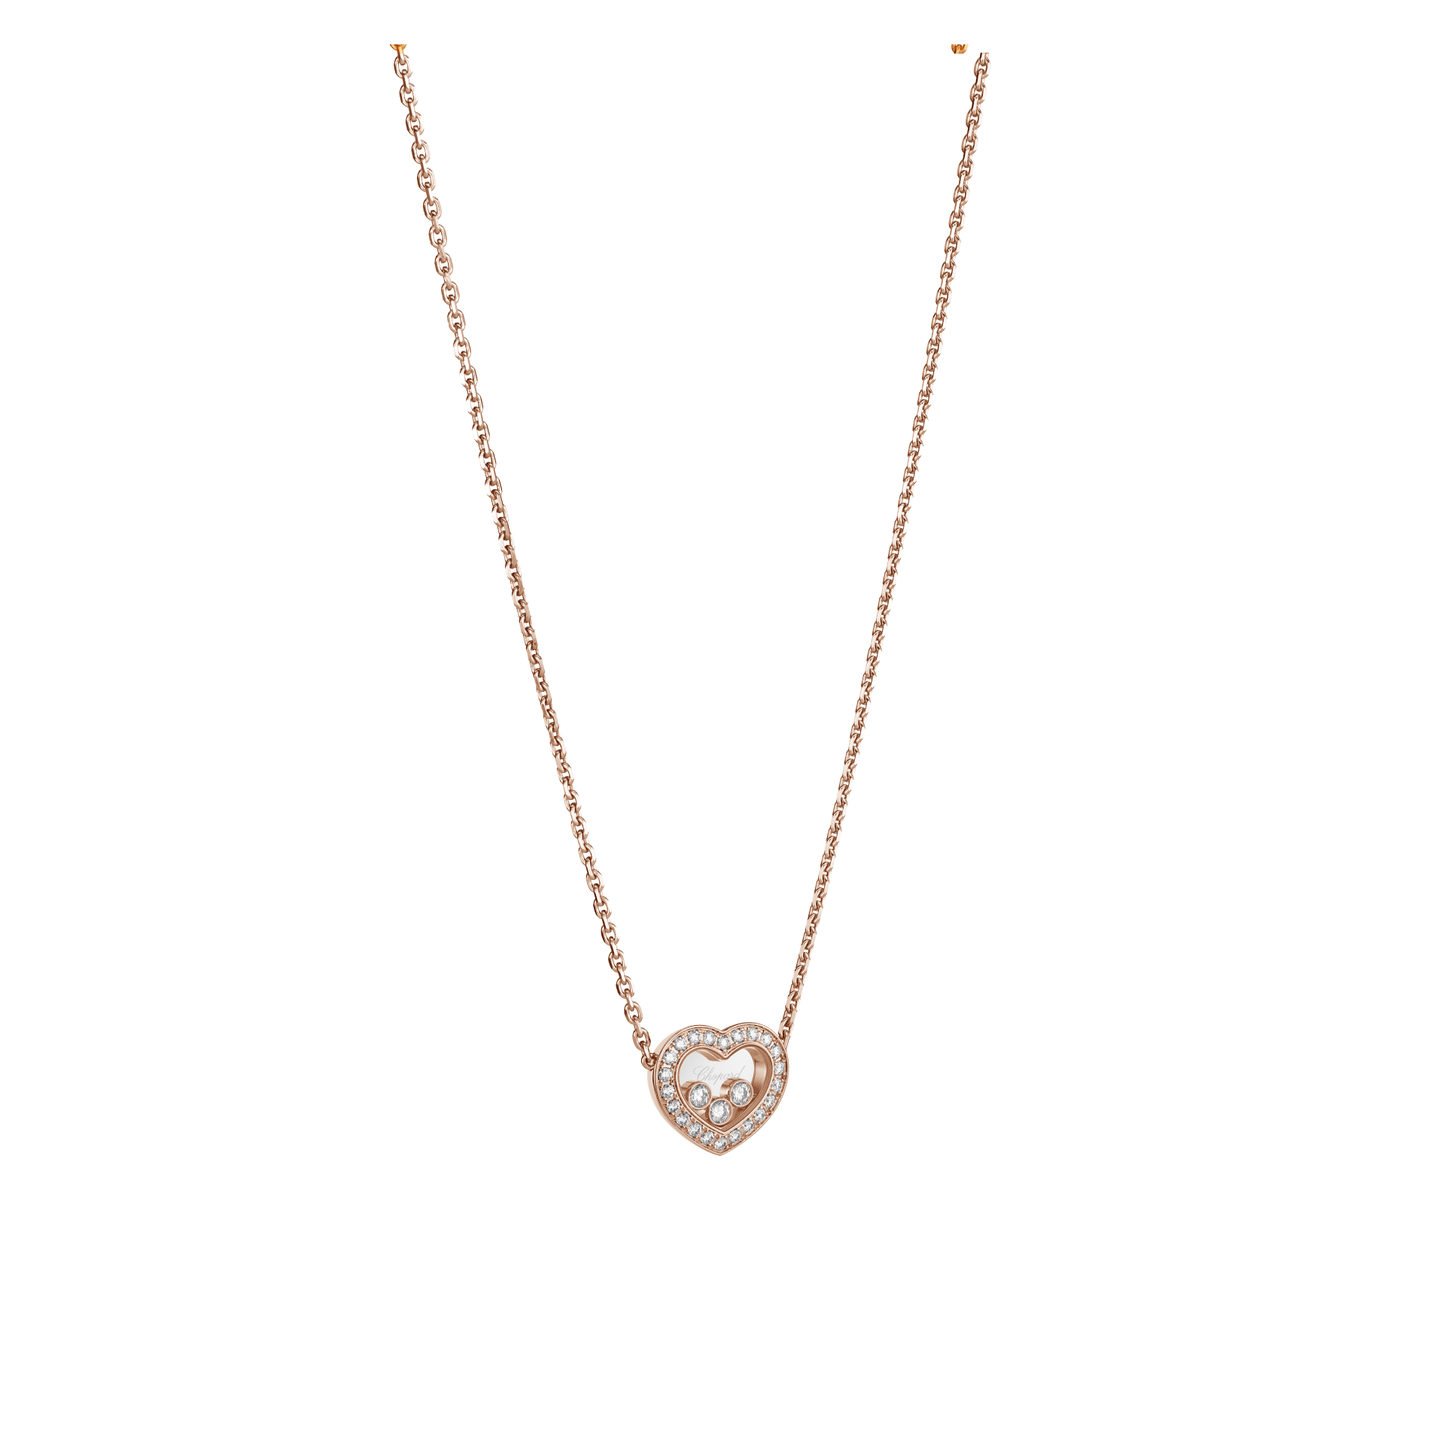 HAPPY DIAMONDS ICONS NECKLACE, ETHICAL ROSE GOLD, DIAMONDS 81A611-5201